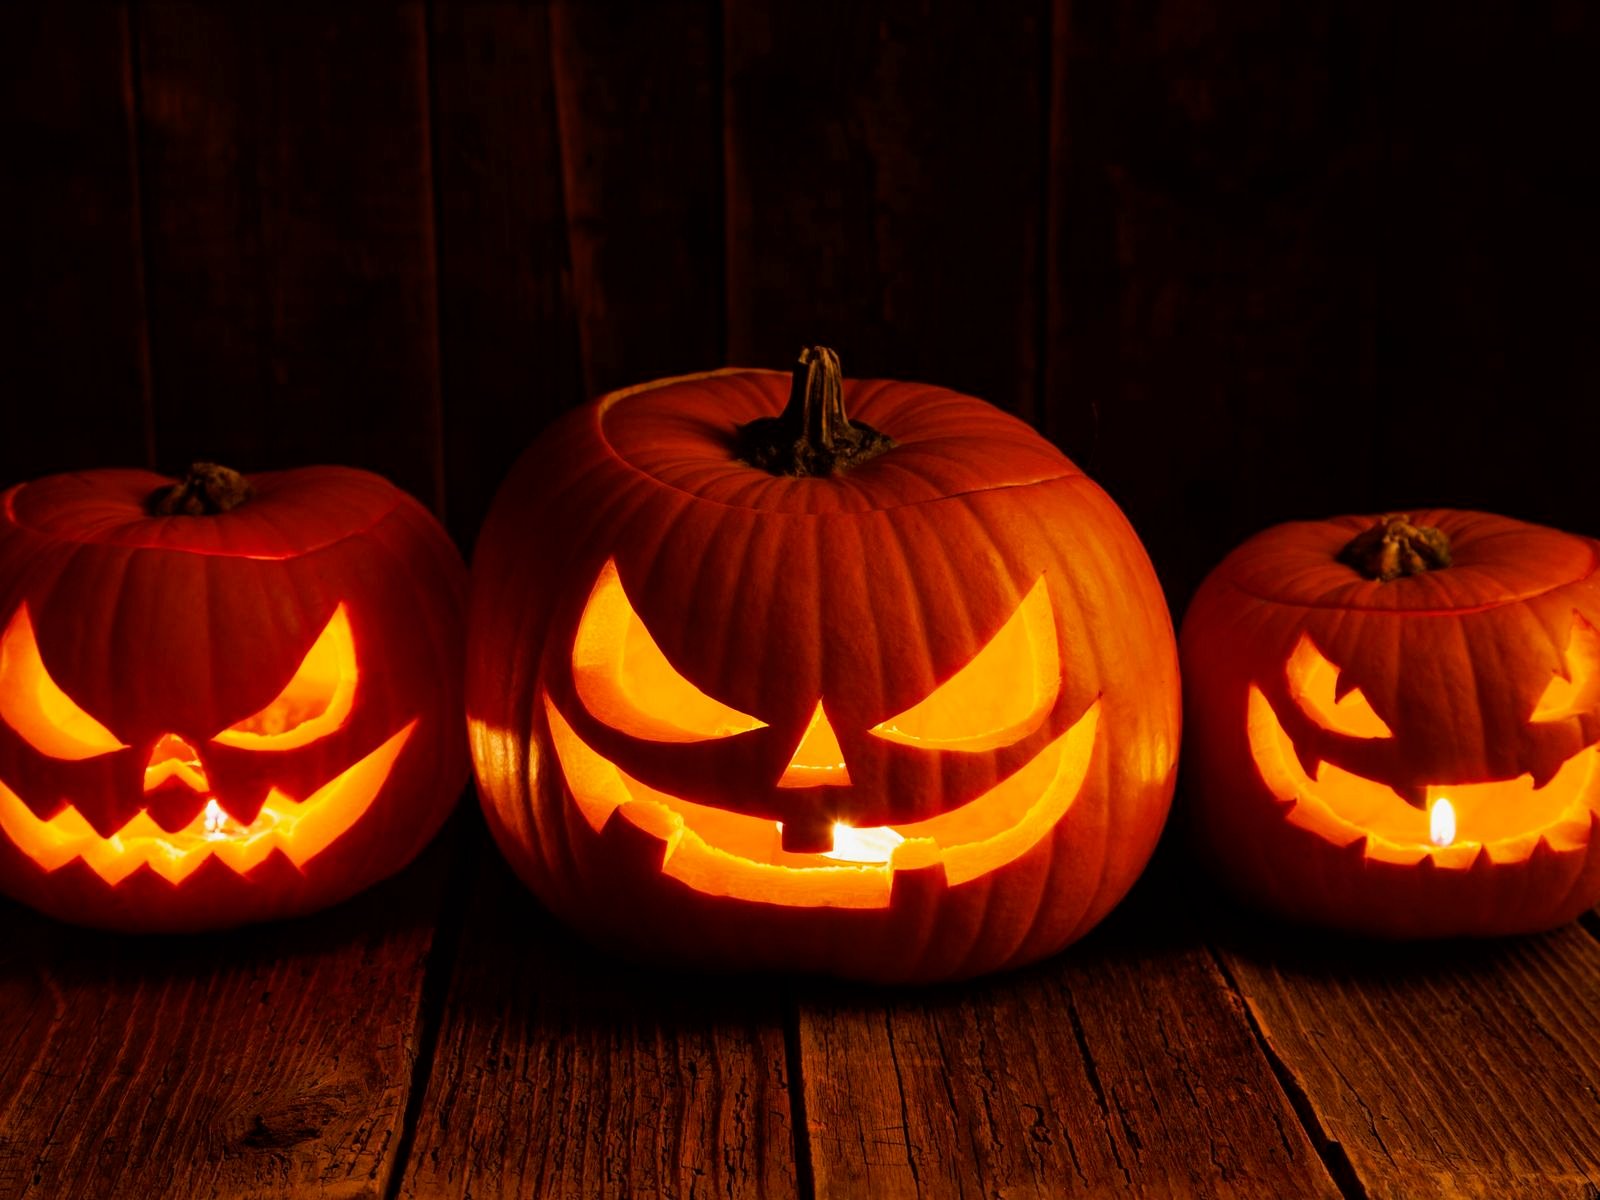 10 Fun Facts About Jack-o'-Lanterns - Facts.net